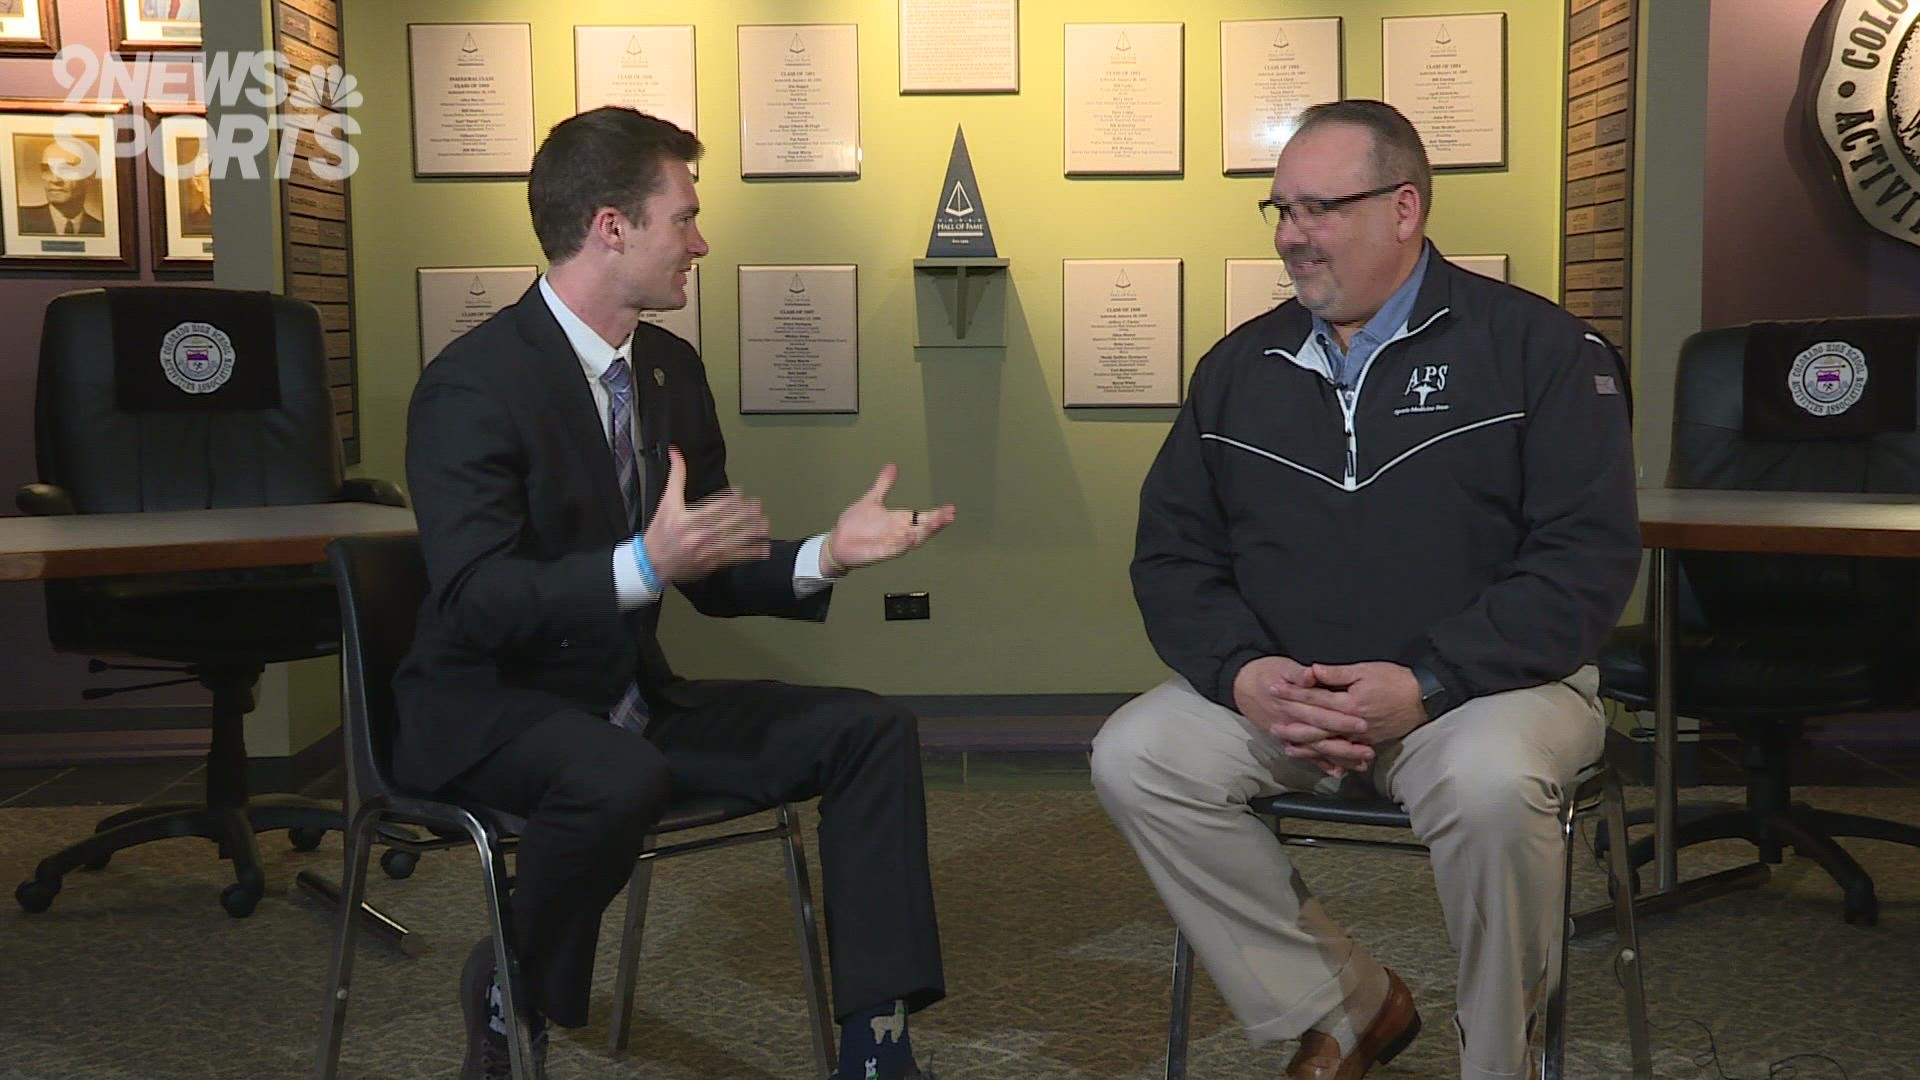 Scotty Gange sits down with the soon-to-be 10th CHSAA Commissioner